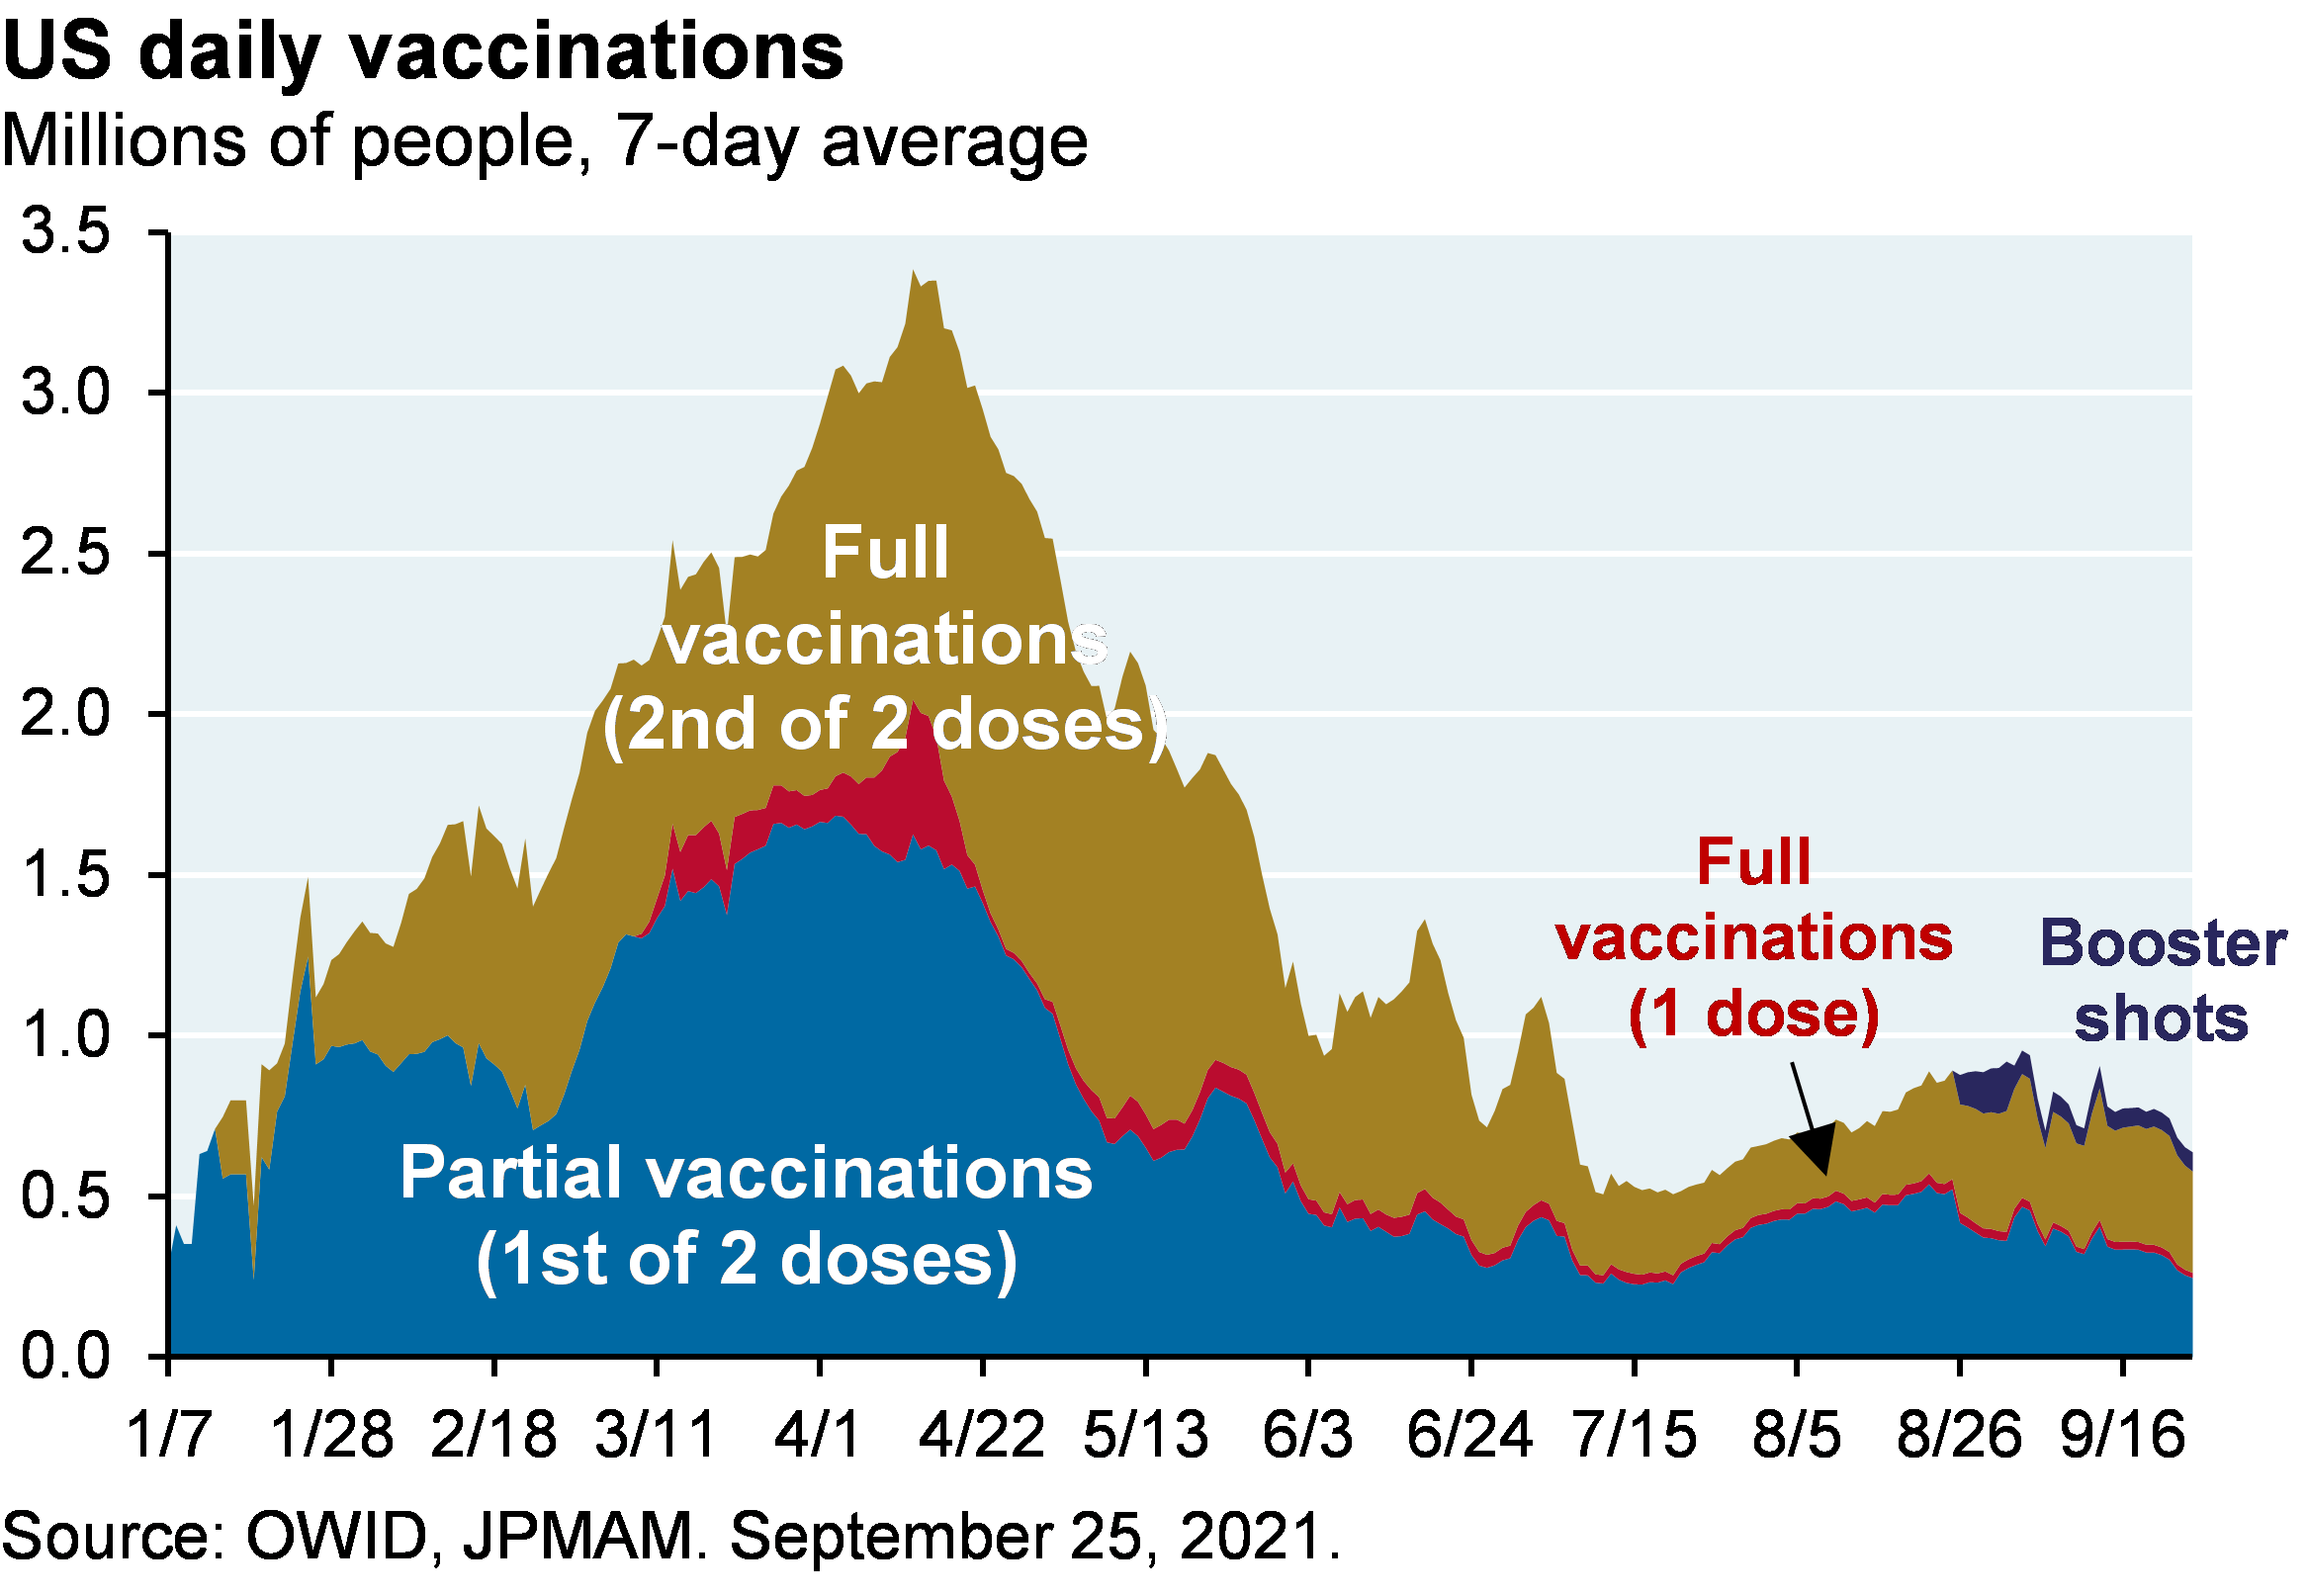 US daily vaccinations